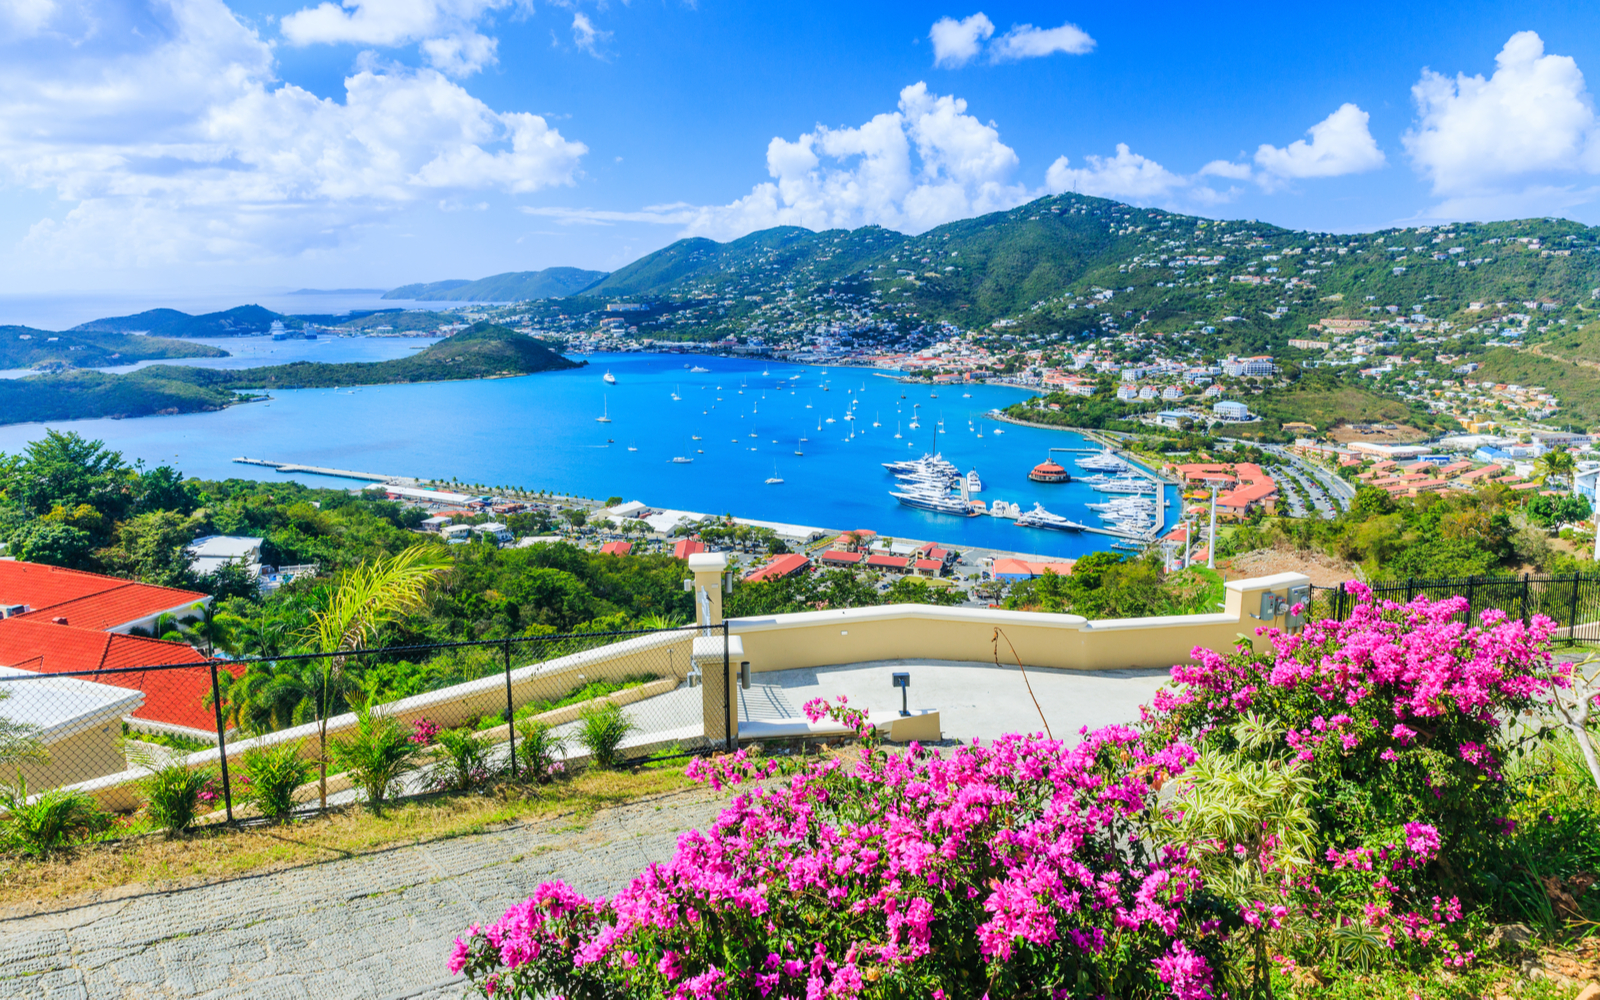 Hilltop view of some of the best resorts in St. Thomas overlooking the bay